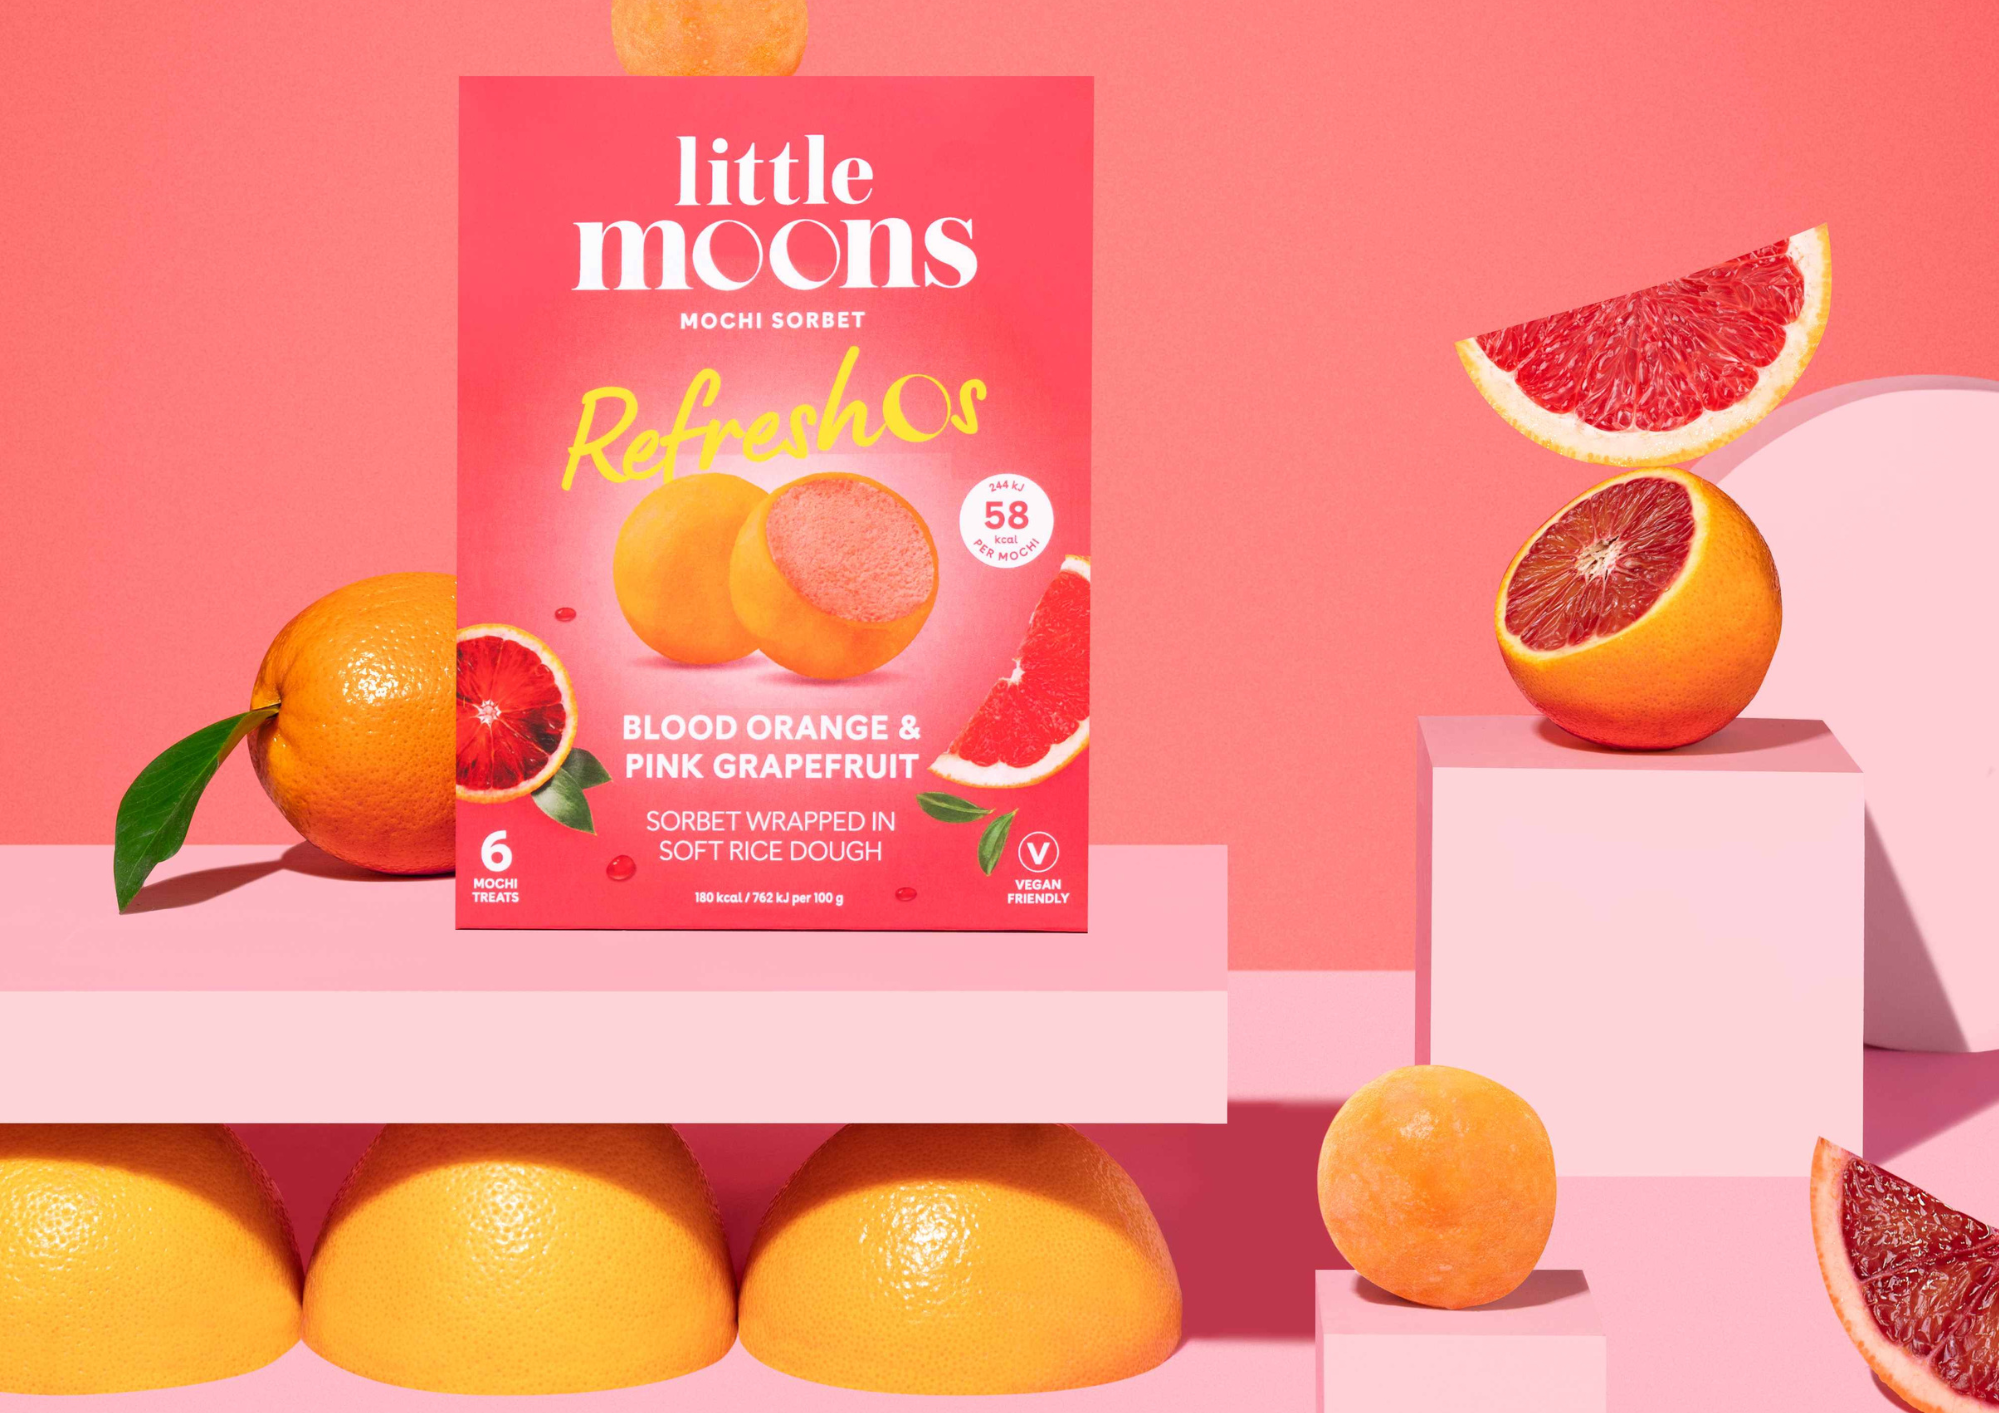 Little Moons CEO Mike Hedges departs company with immediate effect